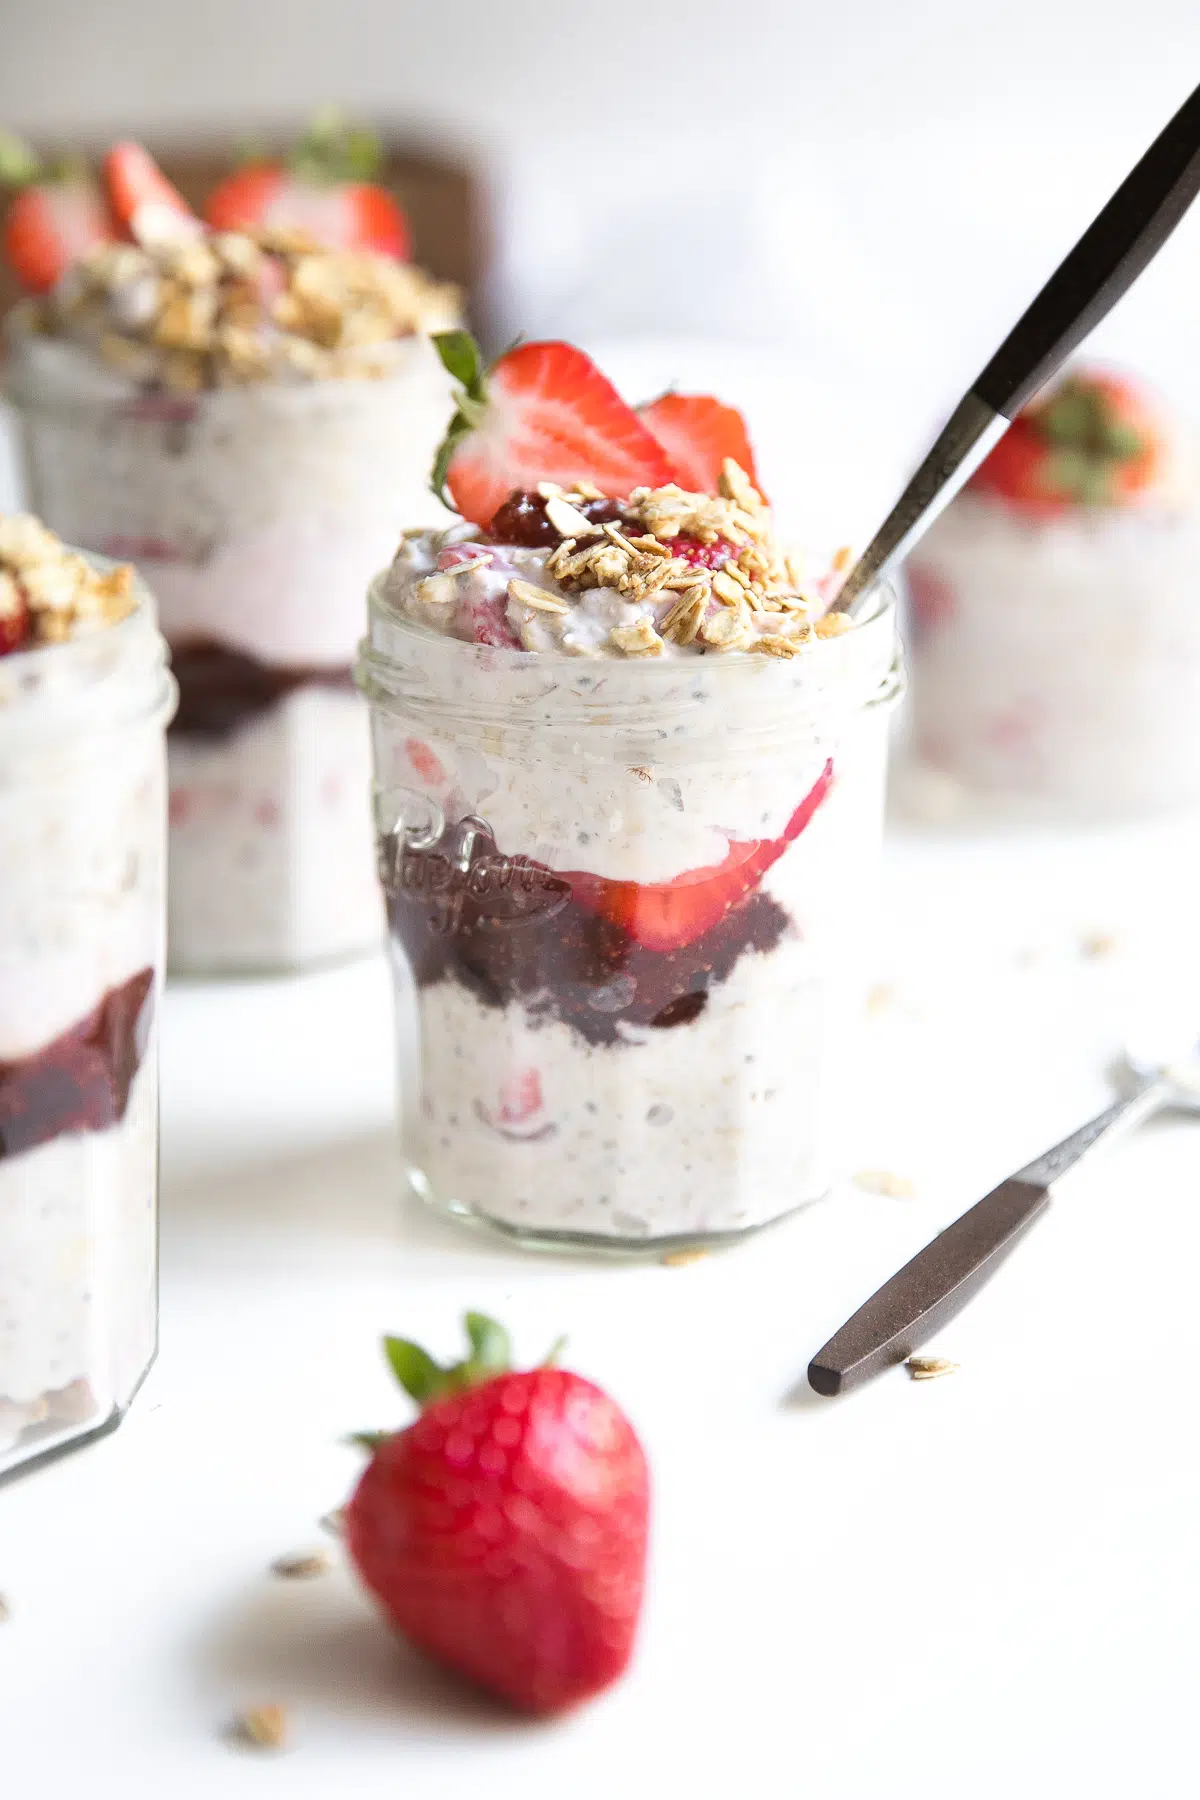 Small jars filled with overnight oats with yogurt and a layer of strawberry jam and fresh strawberries.